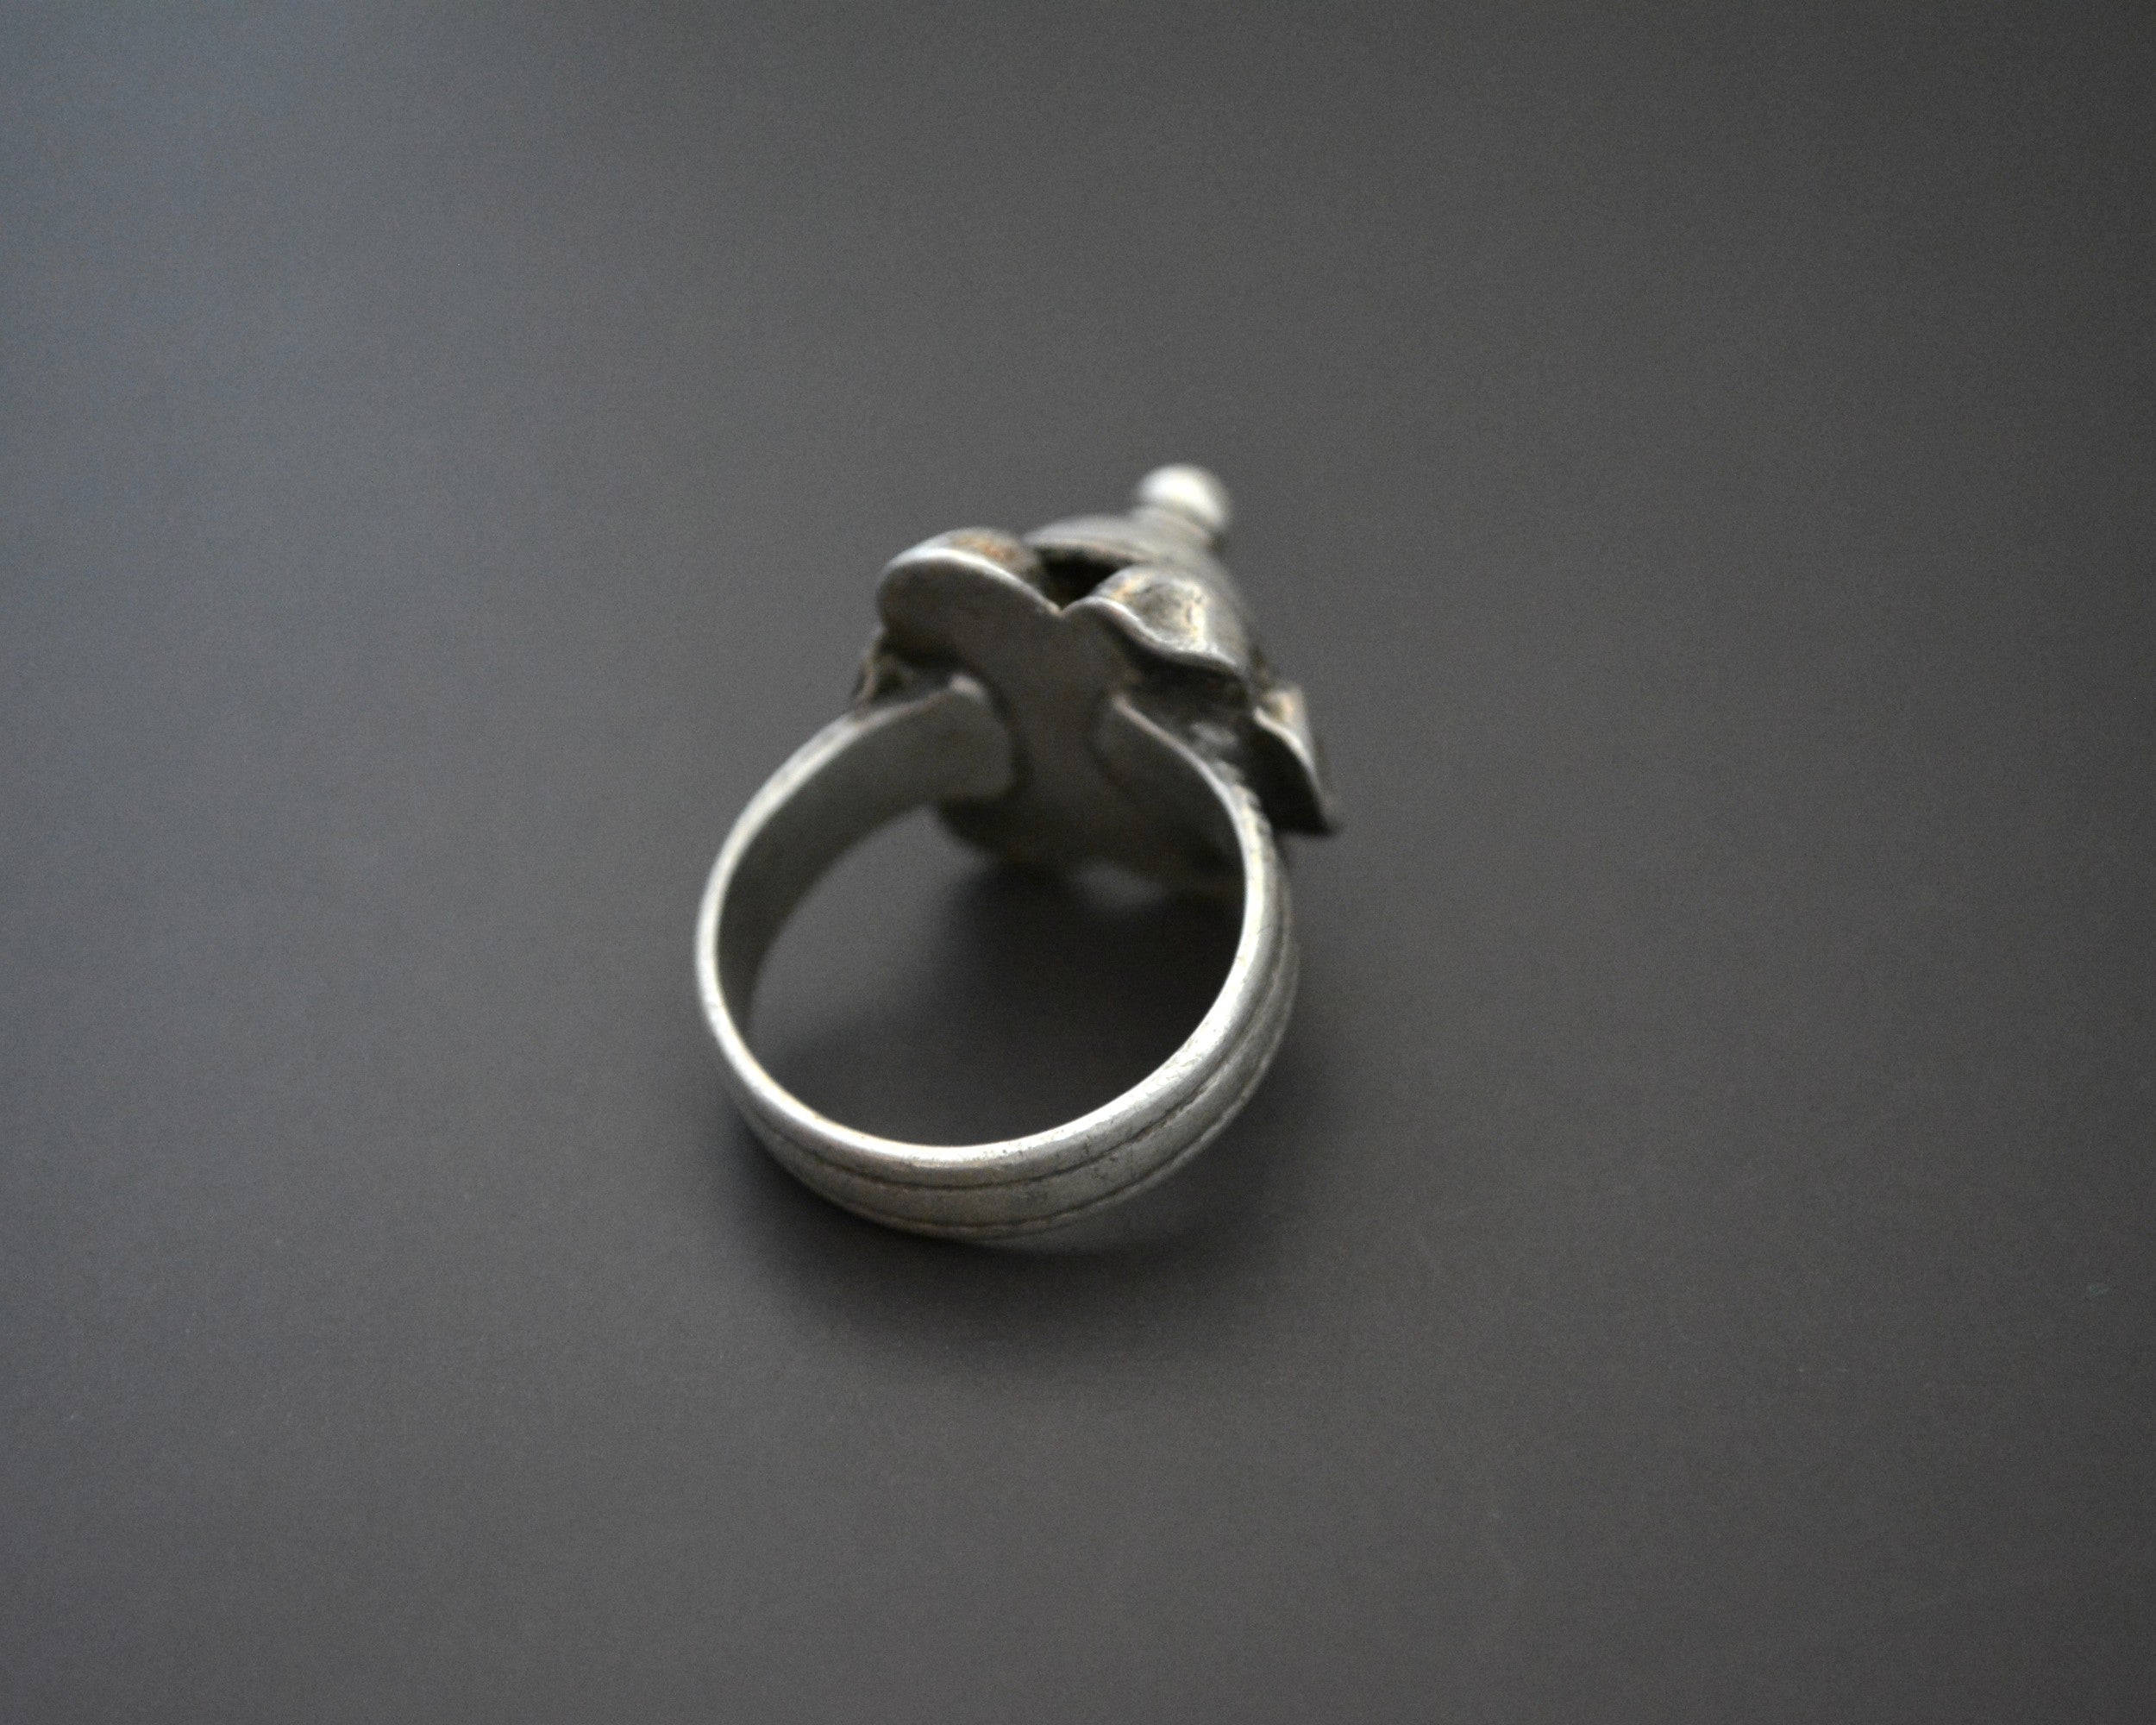 Afghani Silver Ring - Size 8